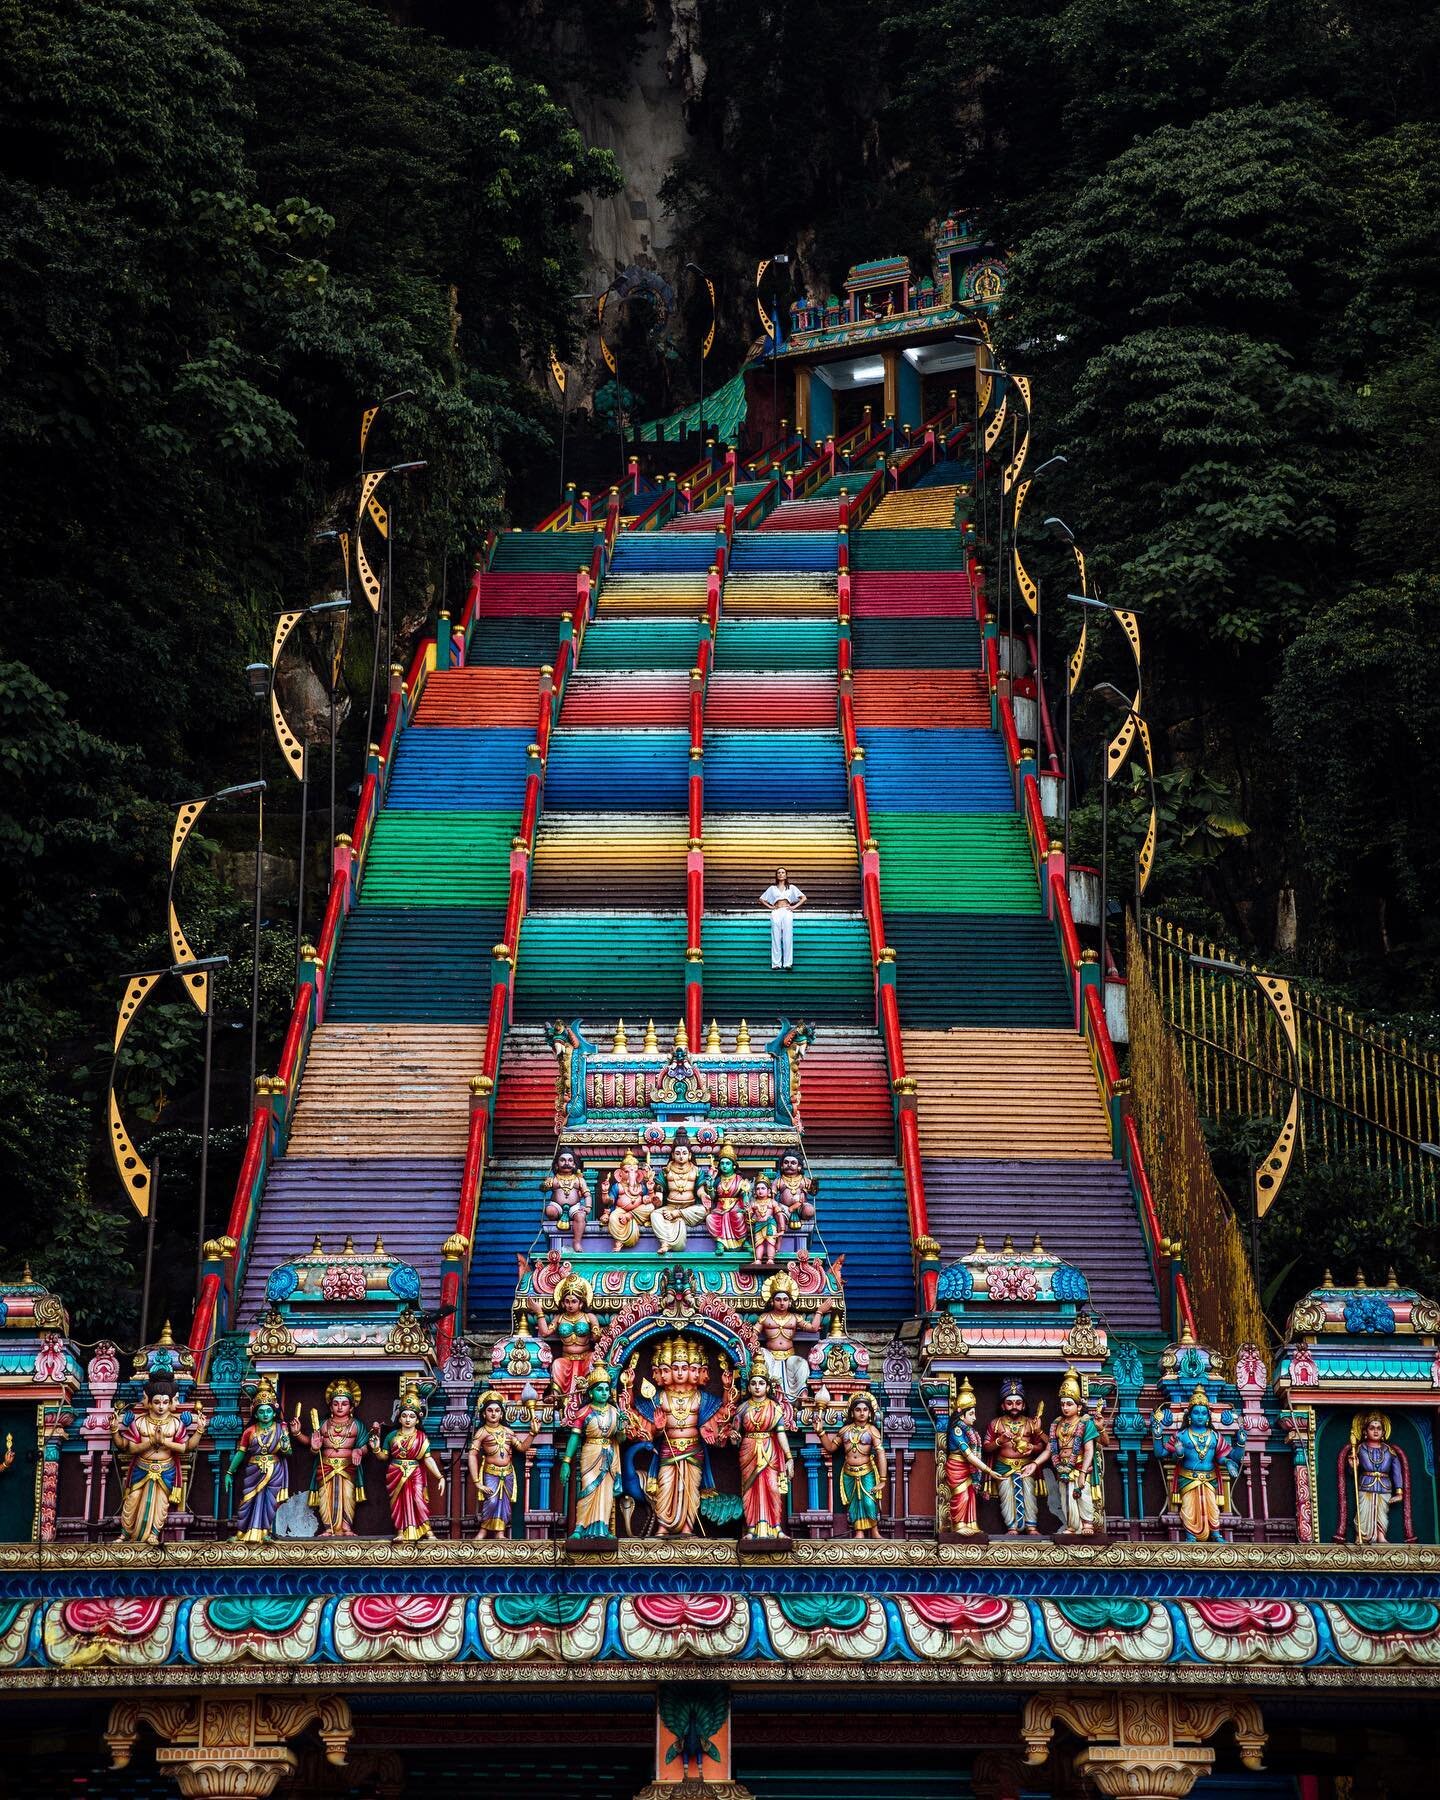 Life&rsquo;s better with a bit of colour 🌈 Got up early on my last morning in KL and headed out to the Batu Caves, a place that I&rsquo;ve wanted to visit for years! To get this shot, I set my camera and tripod up by the entrance and used the built-